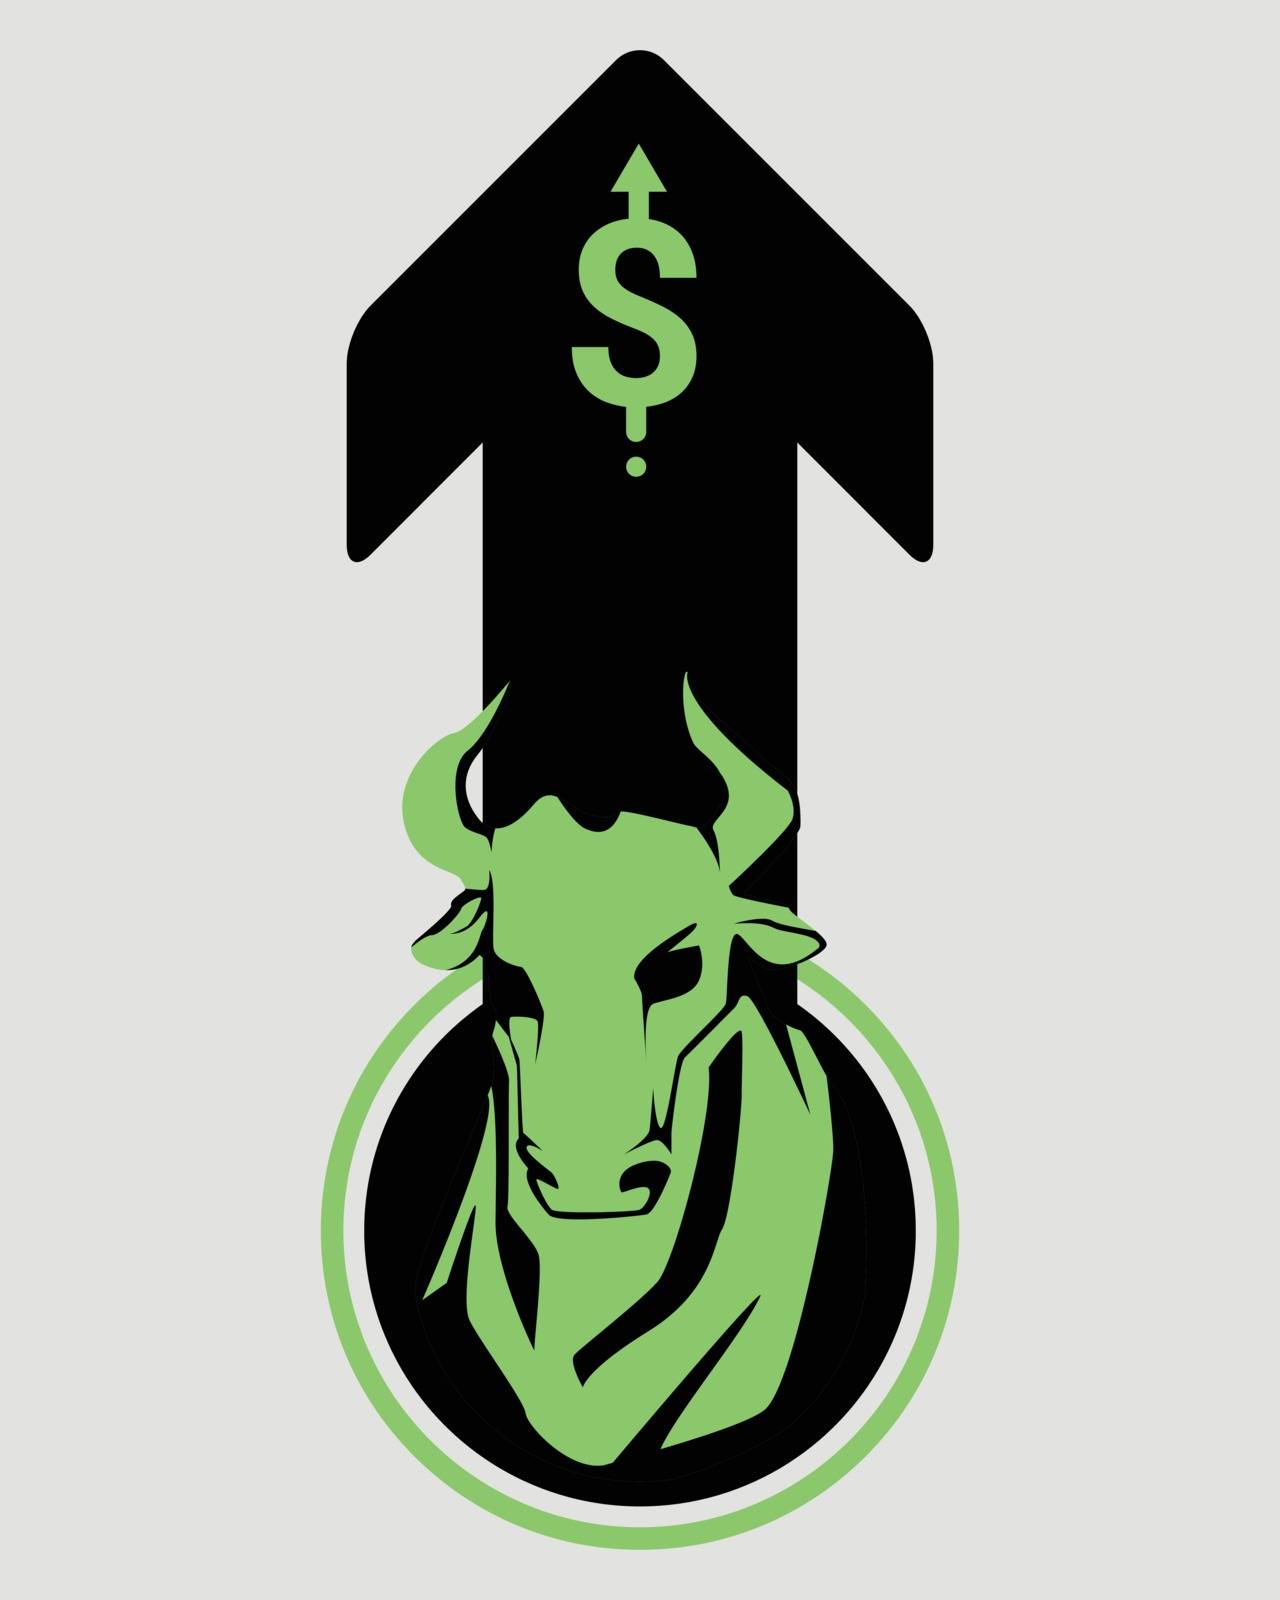 Bullish symbols on stock market vector. Fund, forex or commodity rising price, isolated on gray background. Green bull with up arrow and dallar sign, growing investment trading. Up trend concept by foxeel